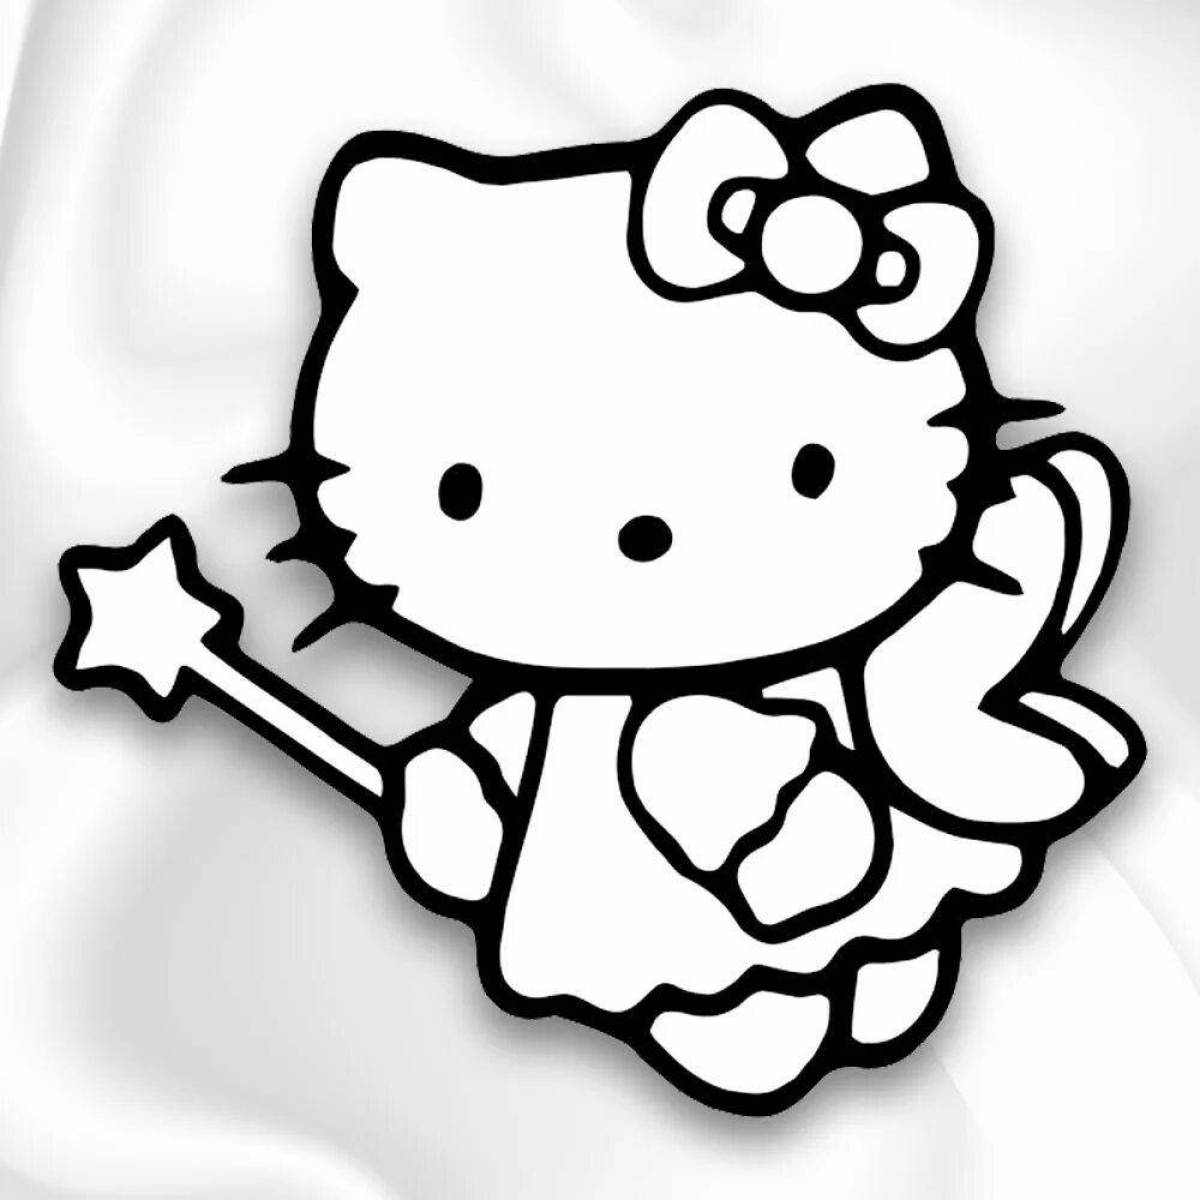 Coloring book sparkling hello kitty stickers